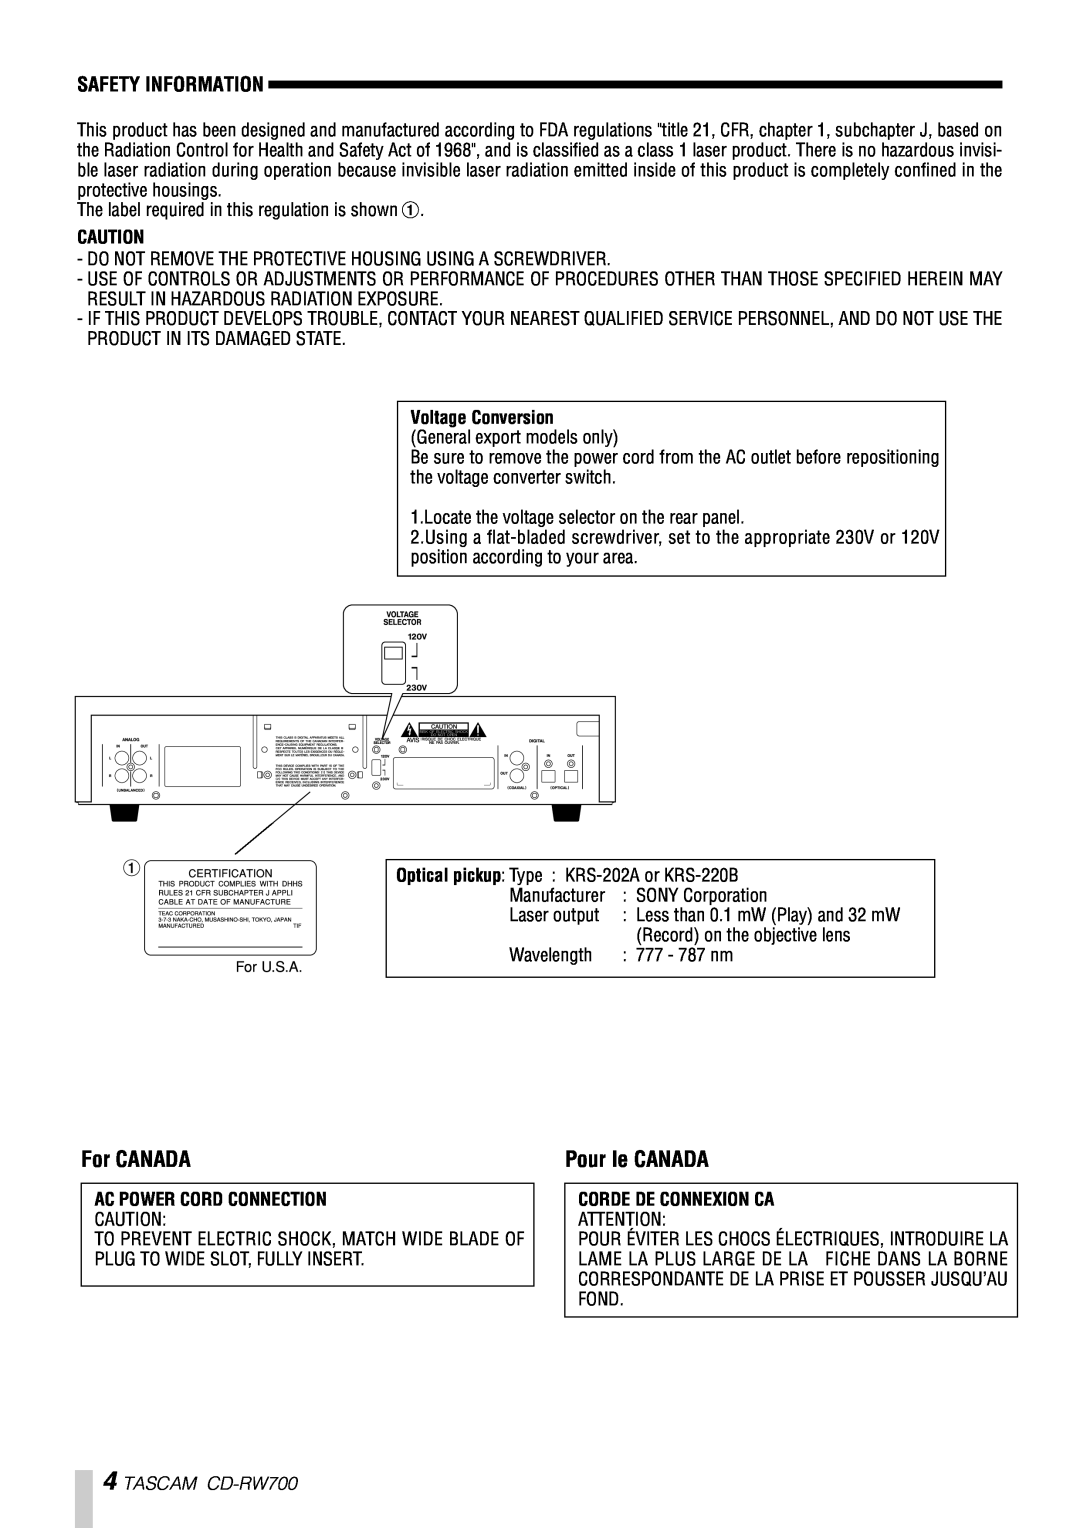 Tascam CD-RW700 owner manual For CANADA, Pour le CANADA, Safety Information, Laser output 